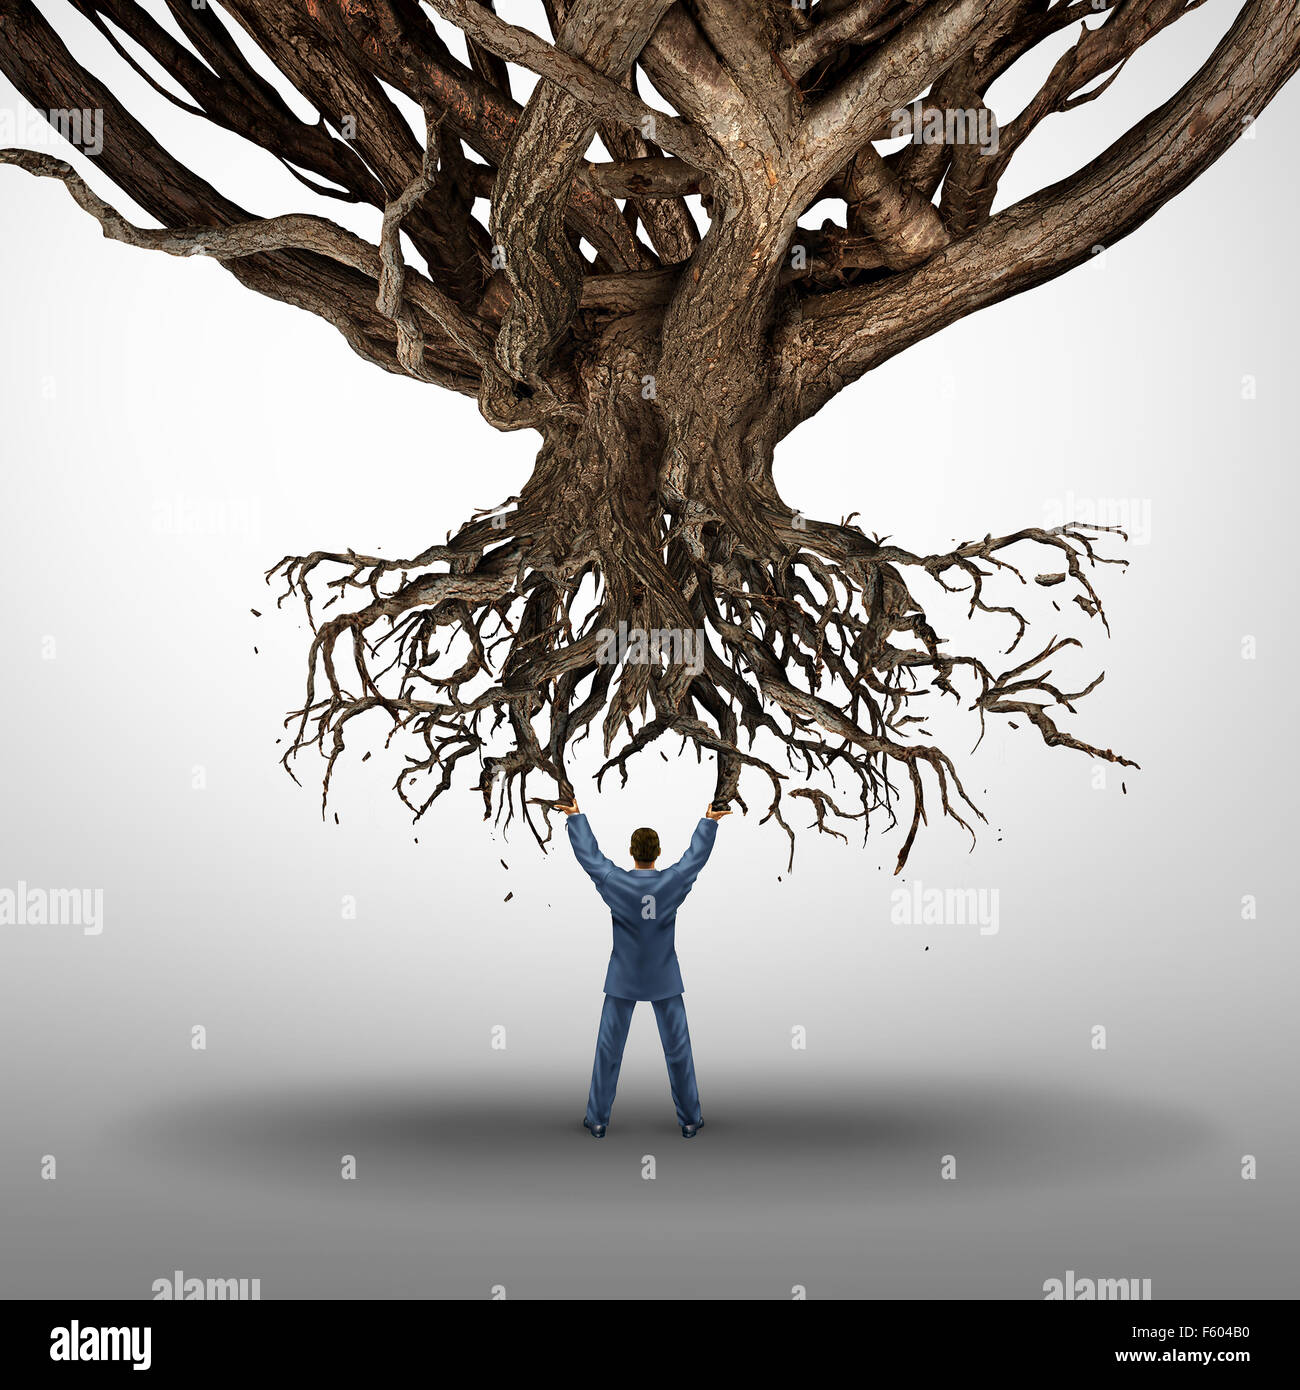 Uprooting and power concept and growt mamnagement symbol as a businessman holding up an uprooted tree as an icon for environmental damage as a business idea. Stock Photo